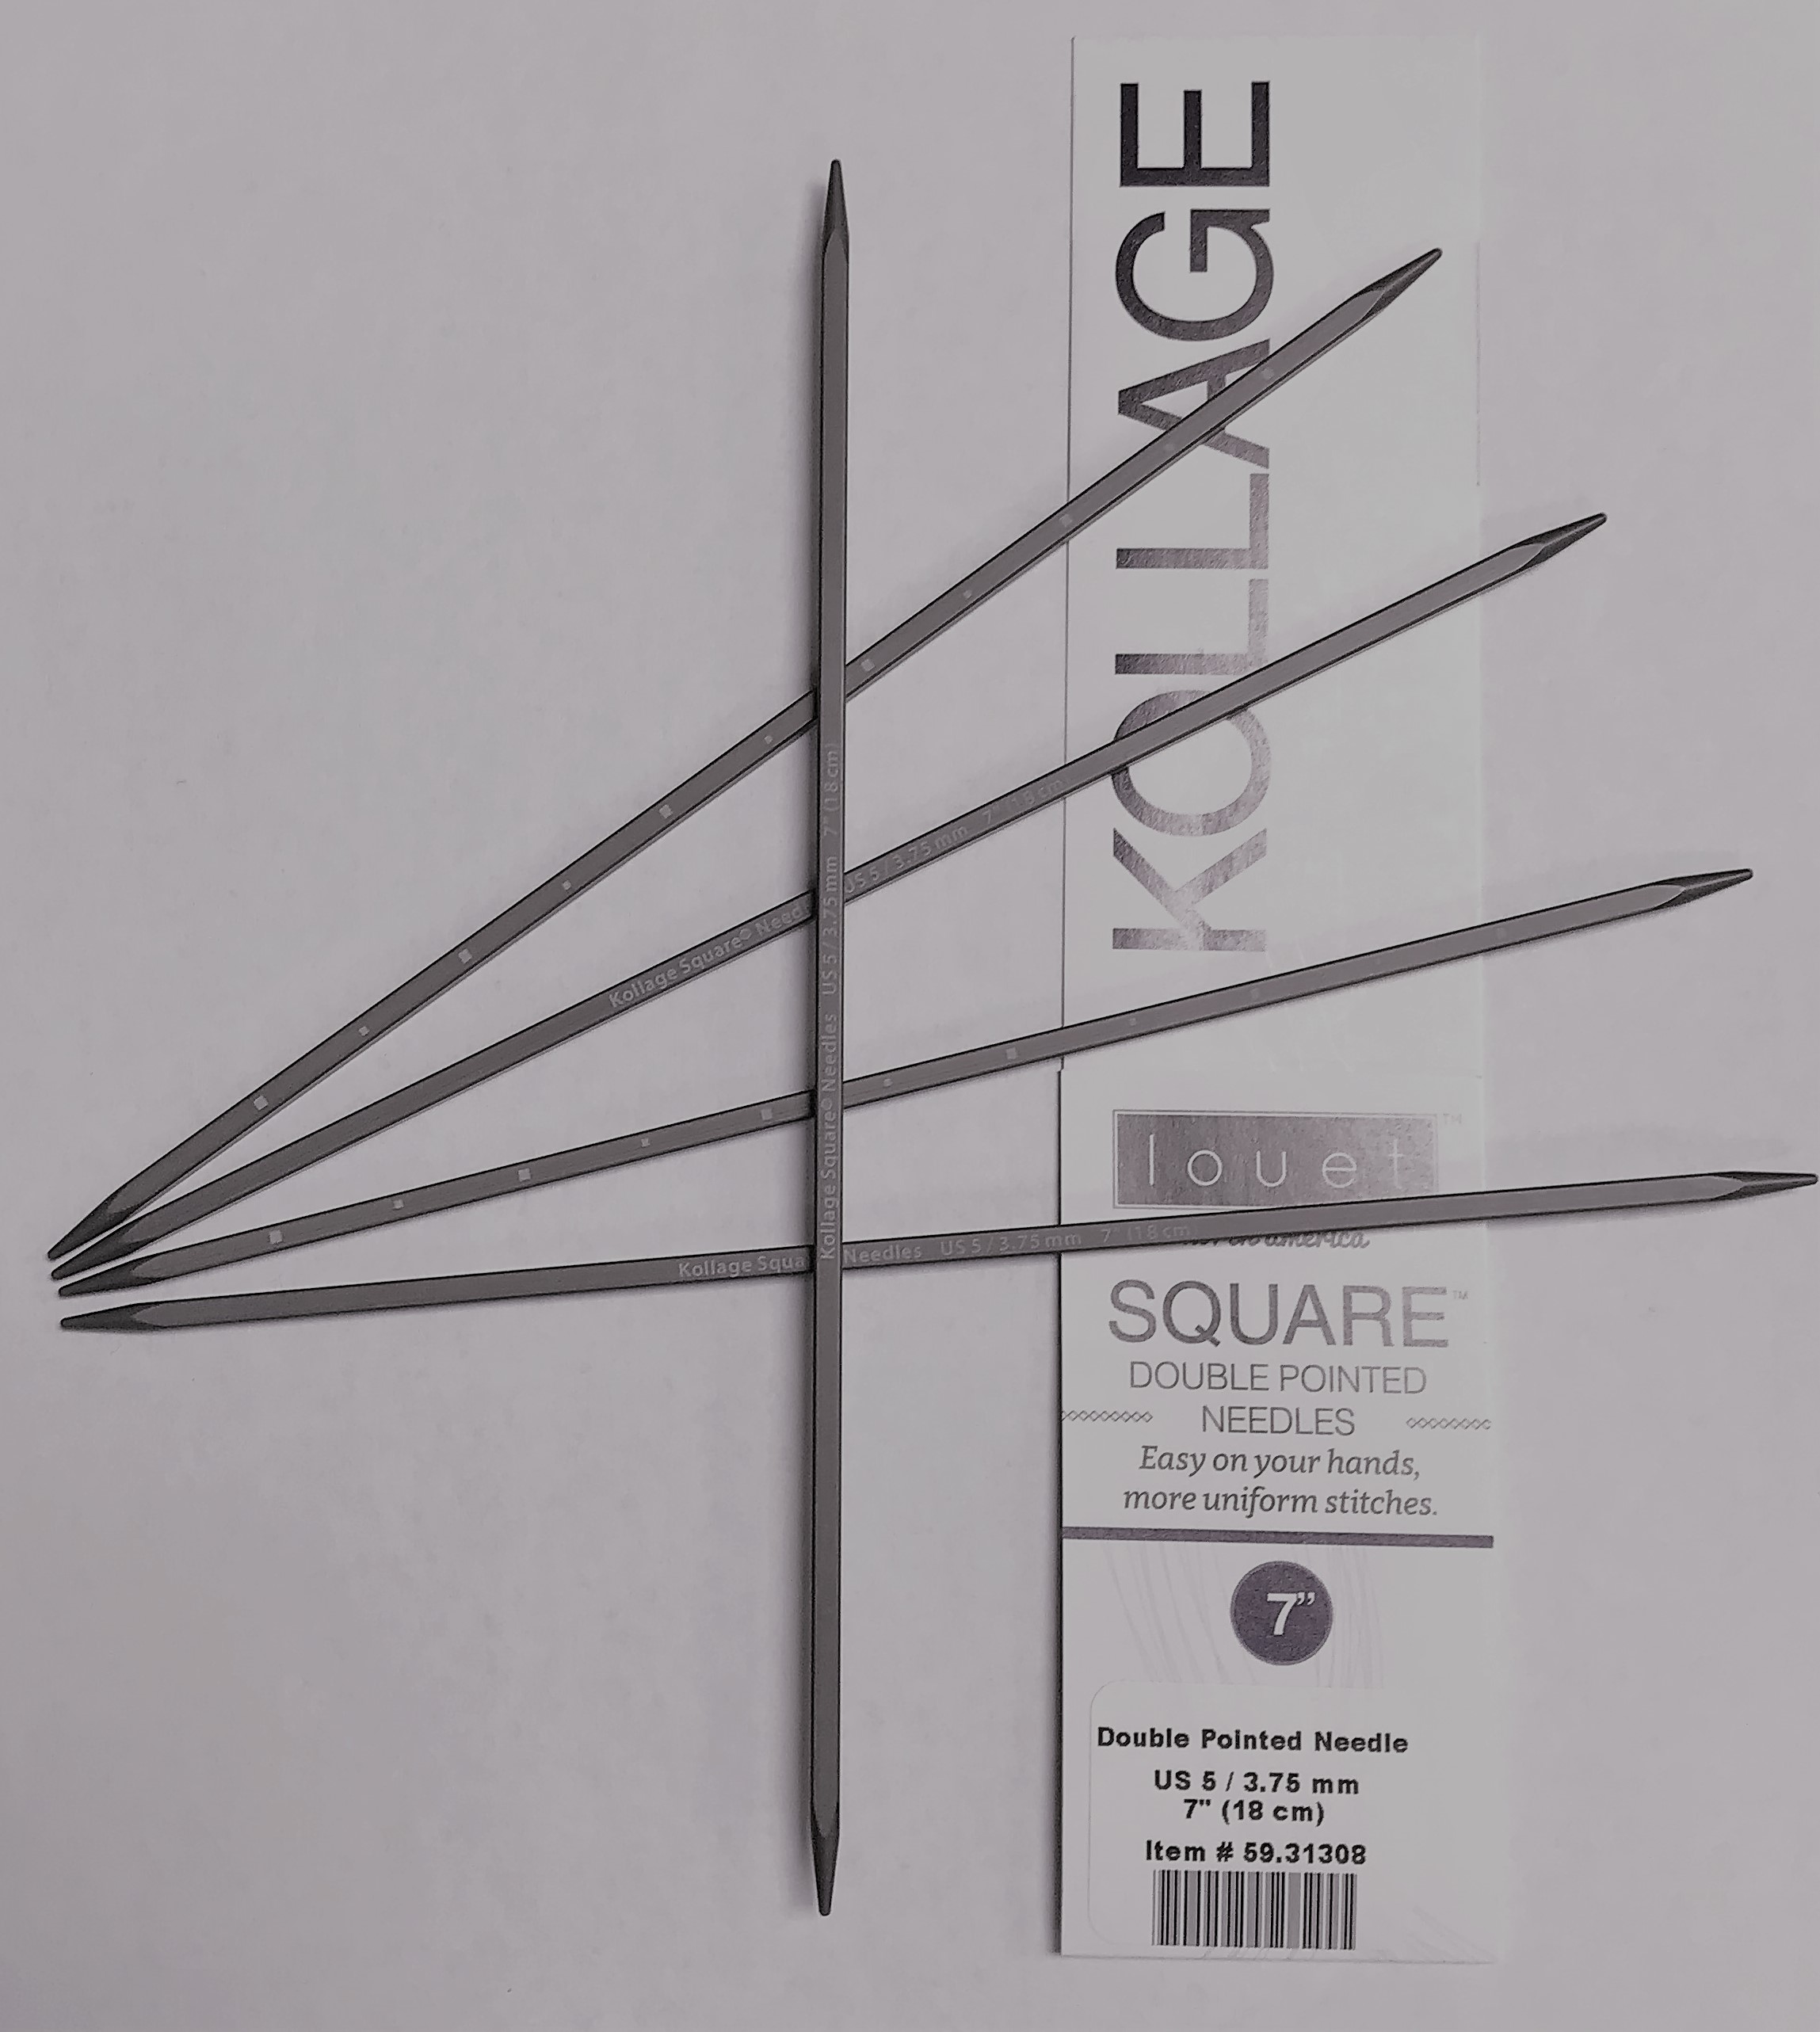 Knitting Needle Double Point 5 Inch Square Kollage 13cm